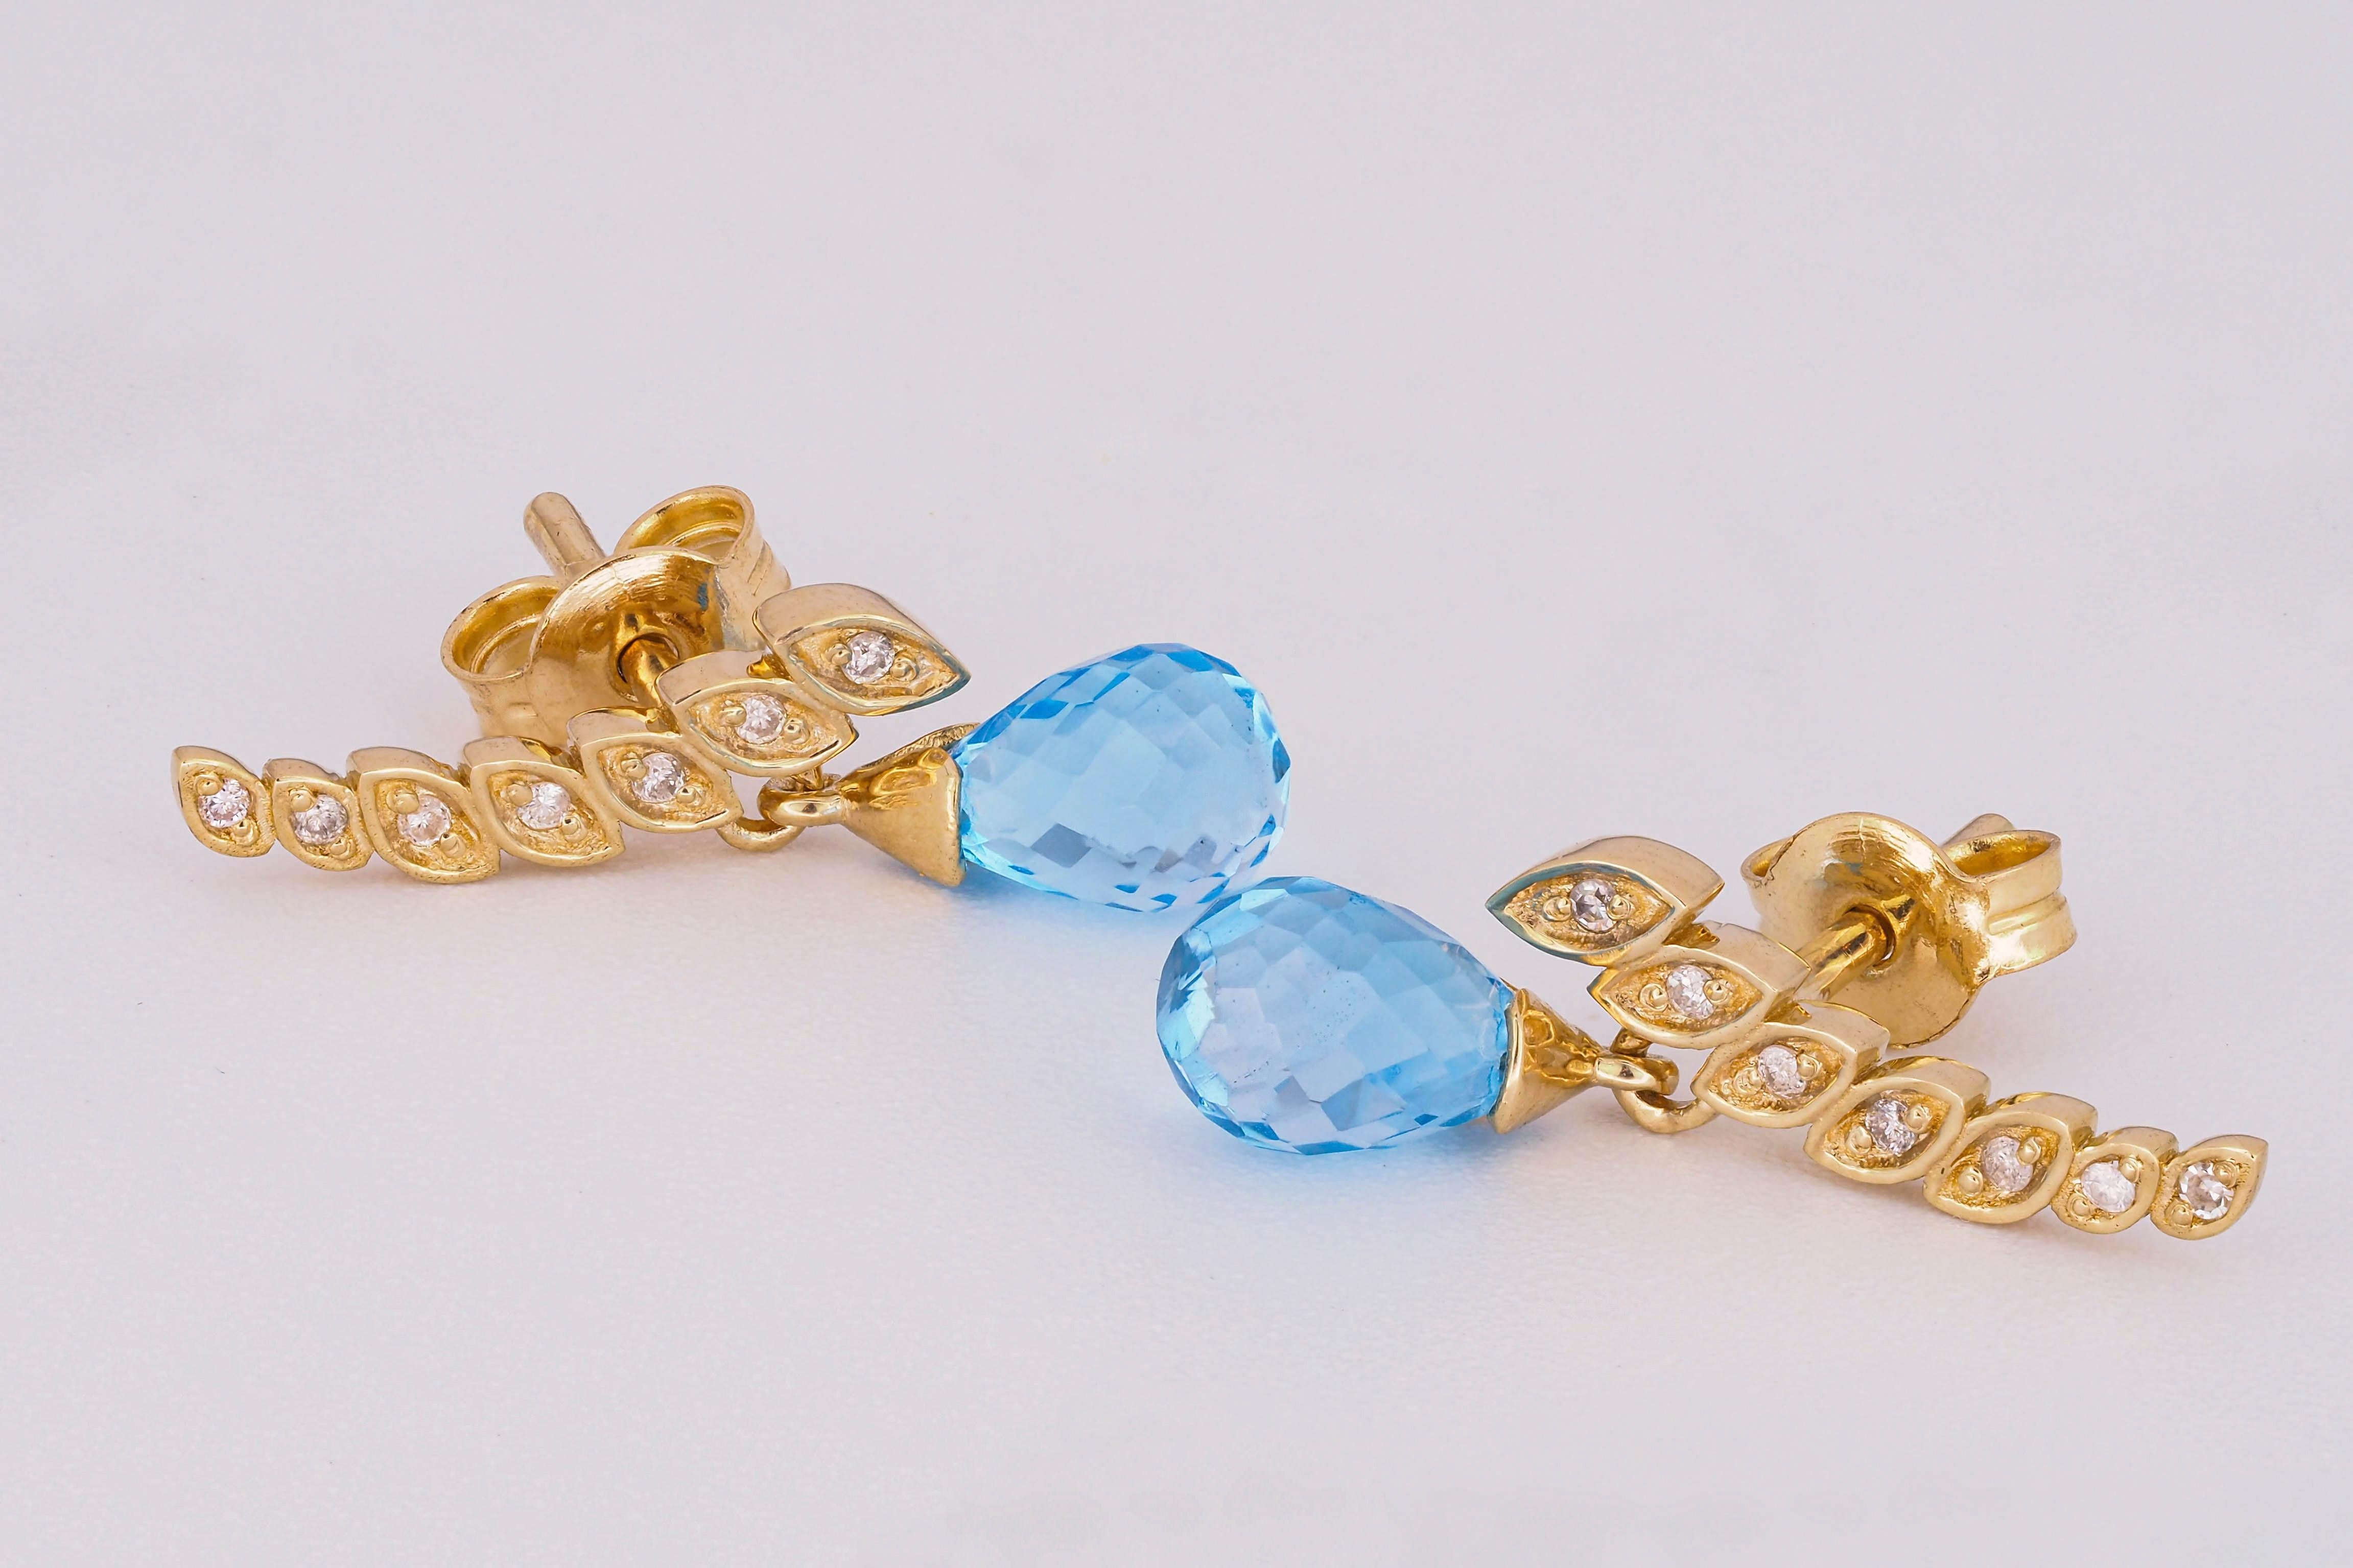 14 kt solid gold earrings with natural topazes briolettes and diamonds. November birthstone.
Total weight: 2.70 g.
Size: 16 x 10 mm.

Central stones: Natural topaz - 2 pieces
Cut: Briolettes
Weight: approx 2.10 ct total.
Color: Blue
Clarity: